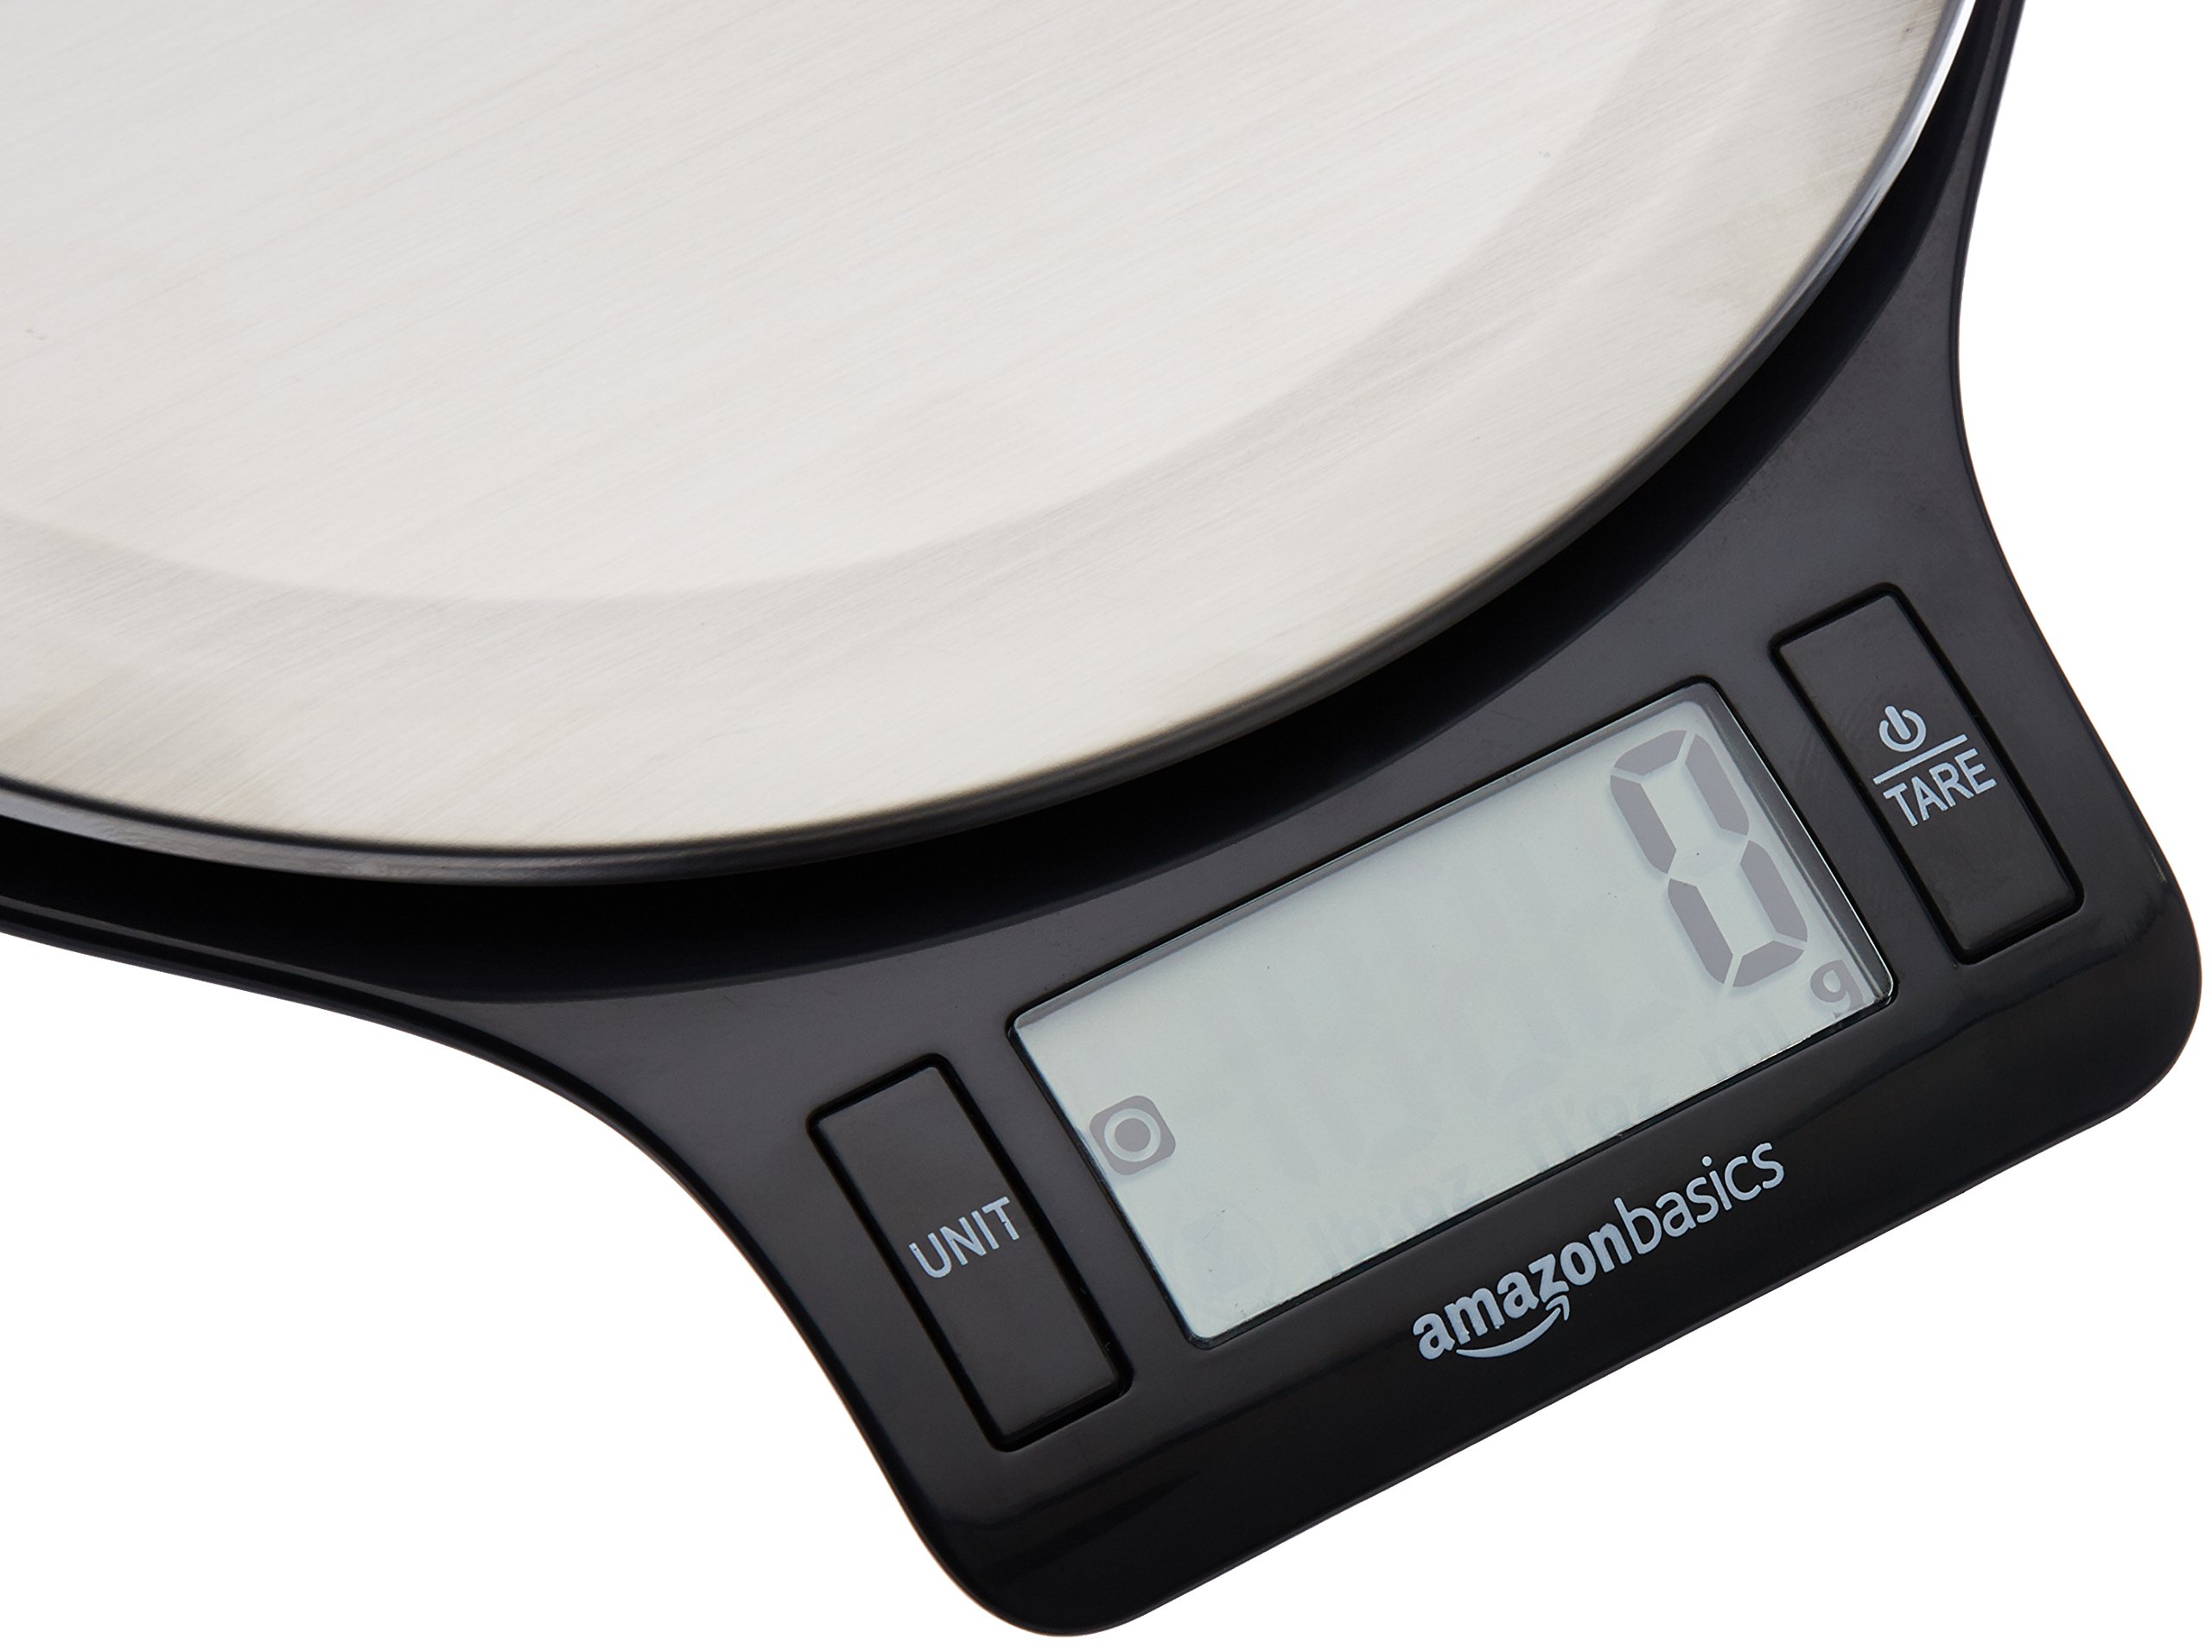 Amazon Basics Digital Kitchen Scale with LCD Display, Batteries Included, Weighs up to 11 pounds, Black and Stainless Steel